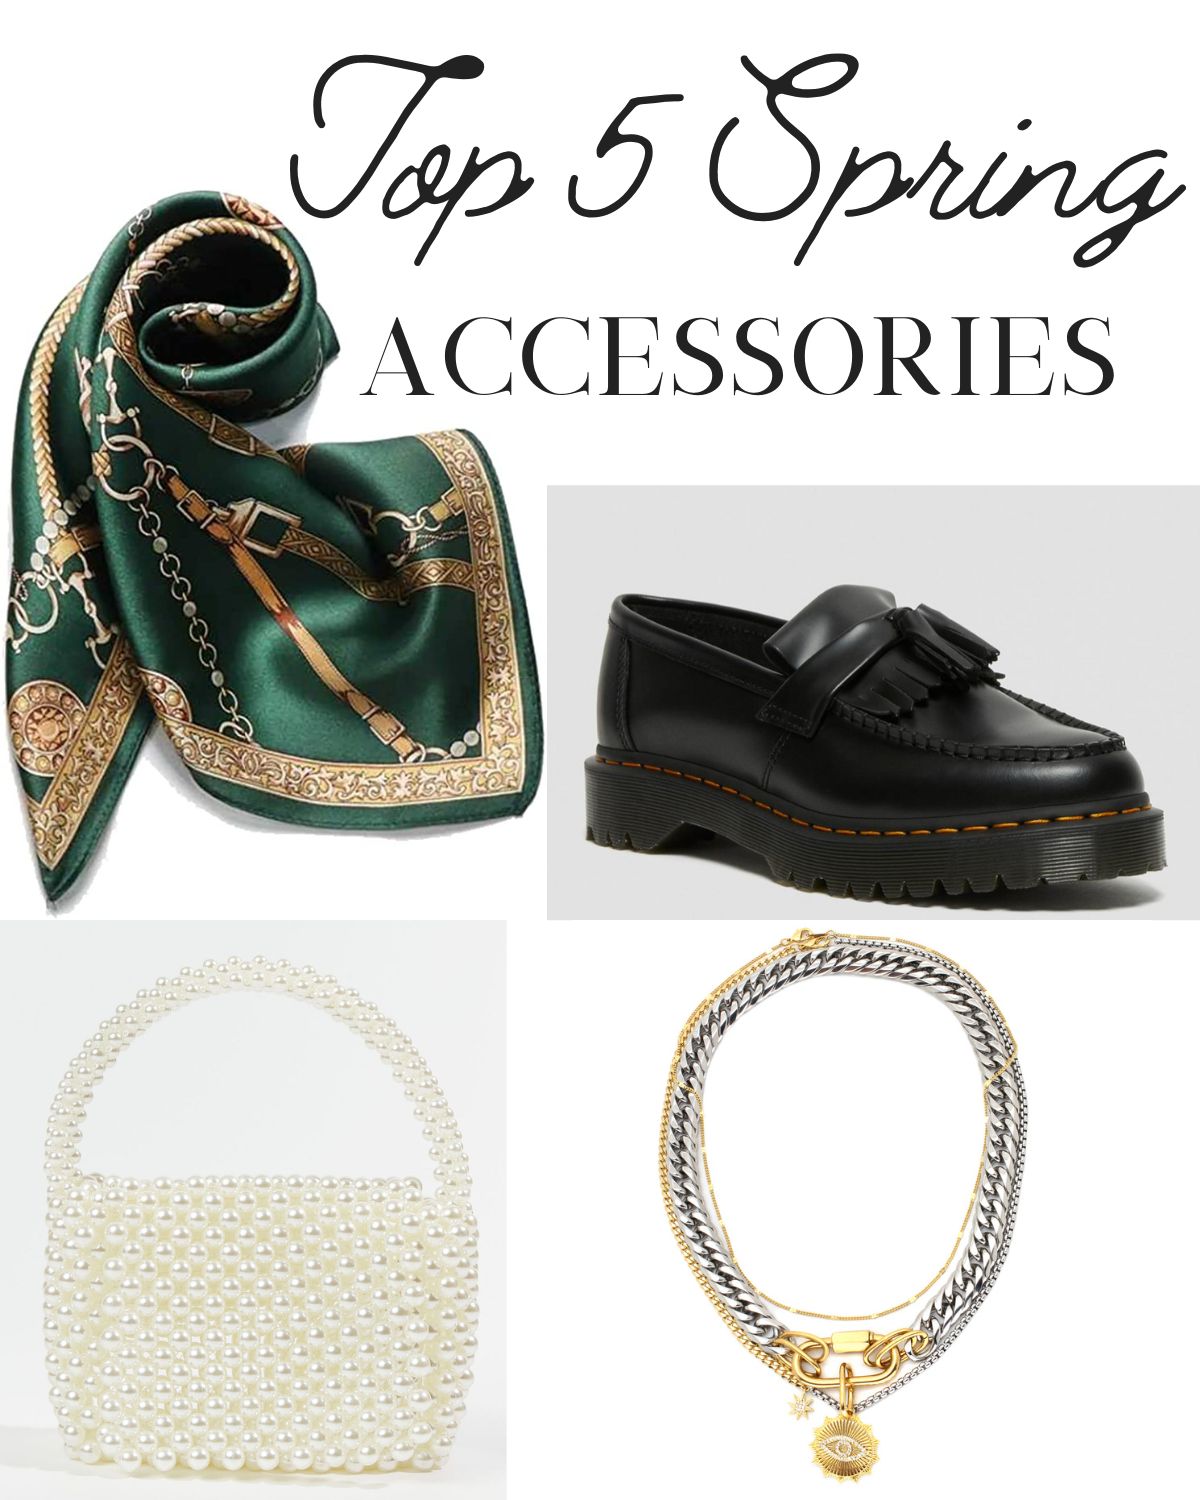 A cute pair of loafers, pearl purse, necklace stacks, and silk scarf